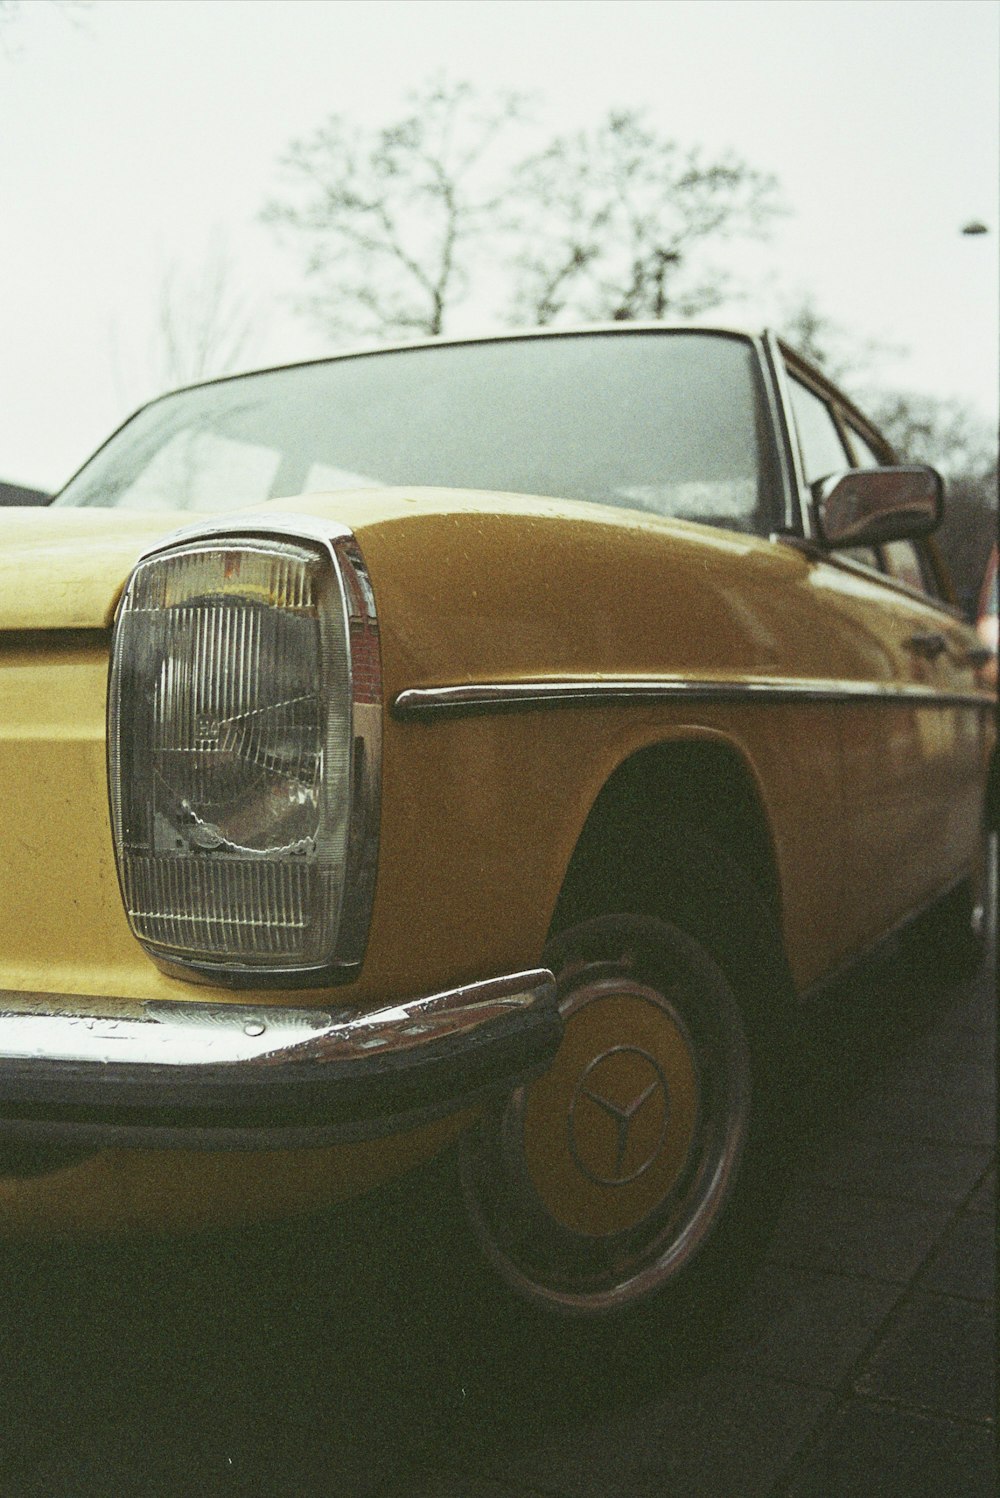 yellow and black car on gray pavement